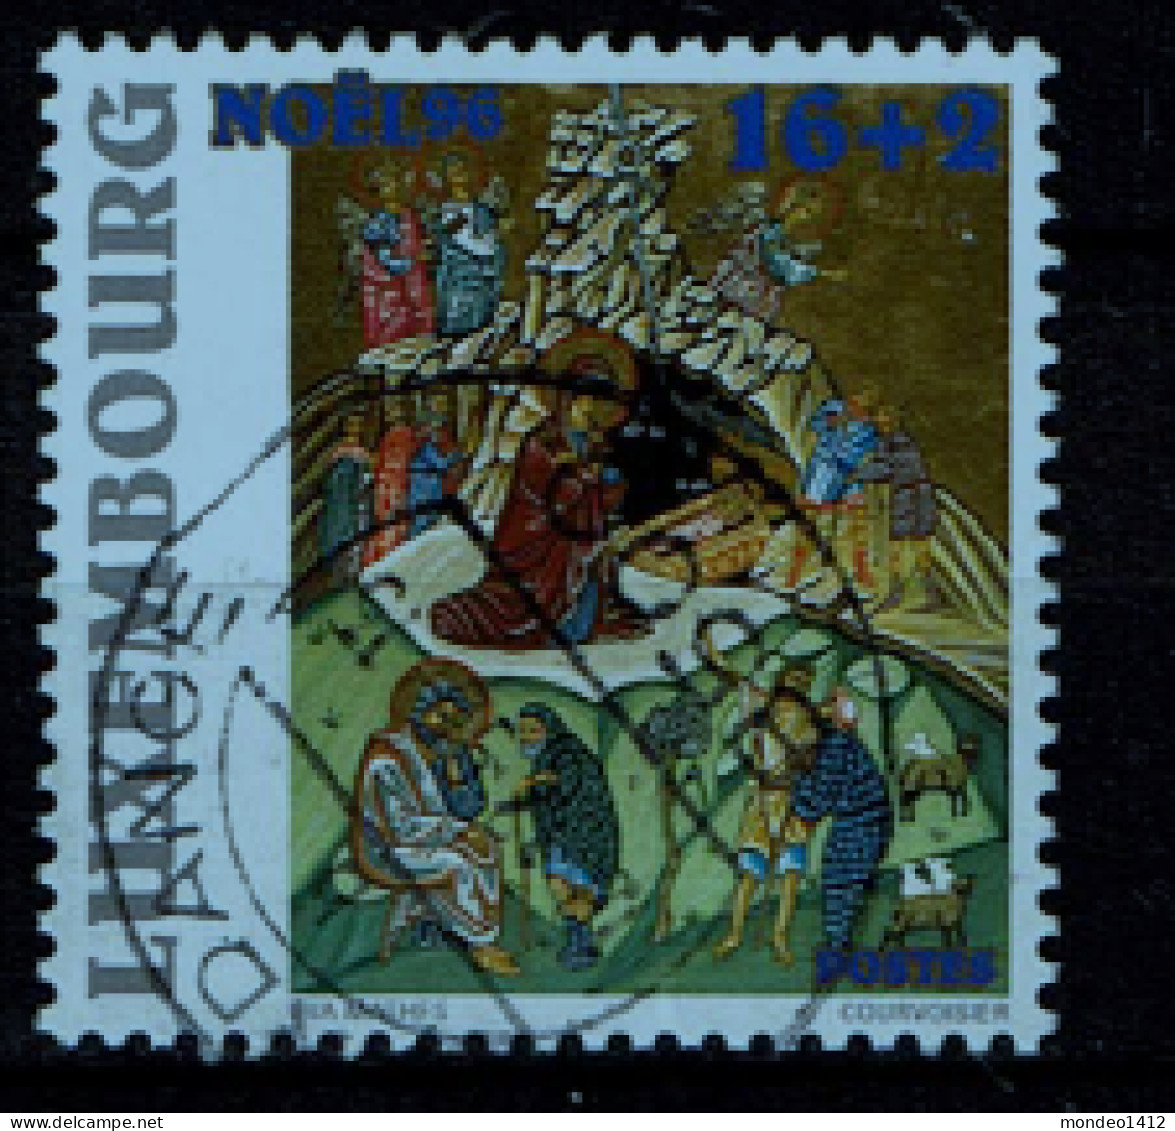 Luxembourg 1996 - YT 1358 - Merry Christmas, Nöel, Weihnachten - Used Stamps